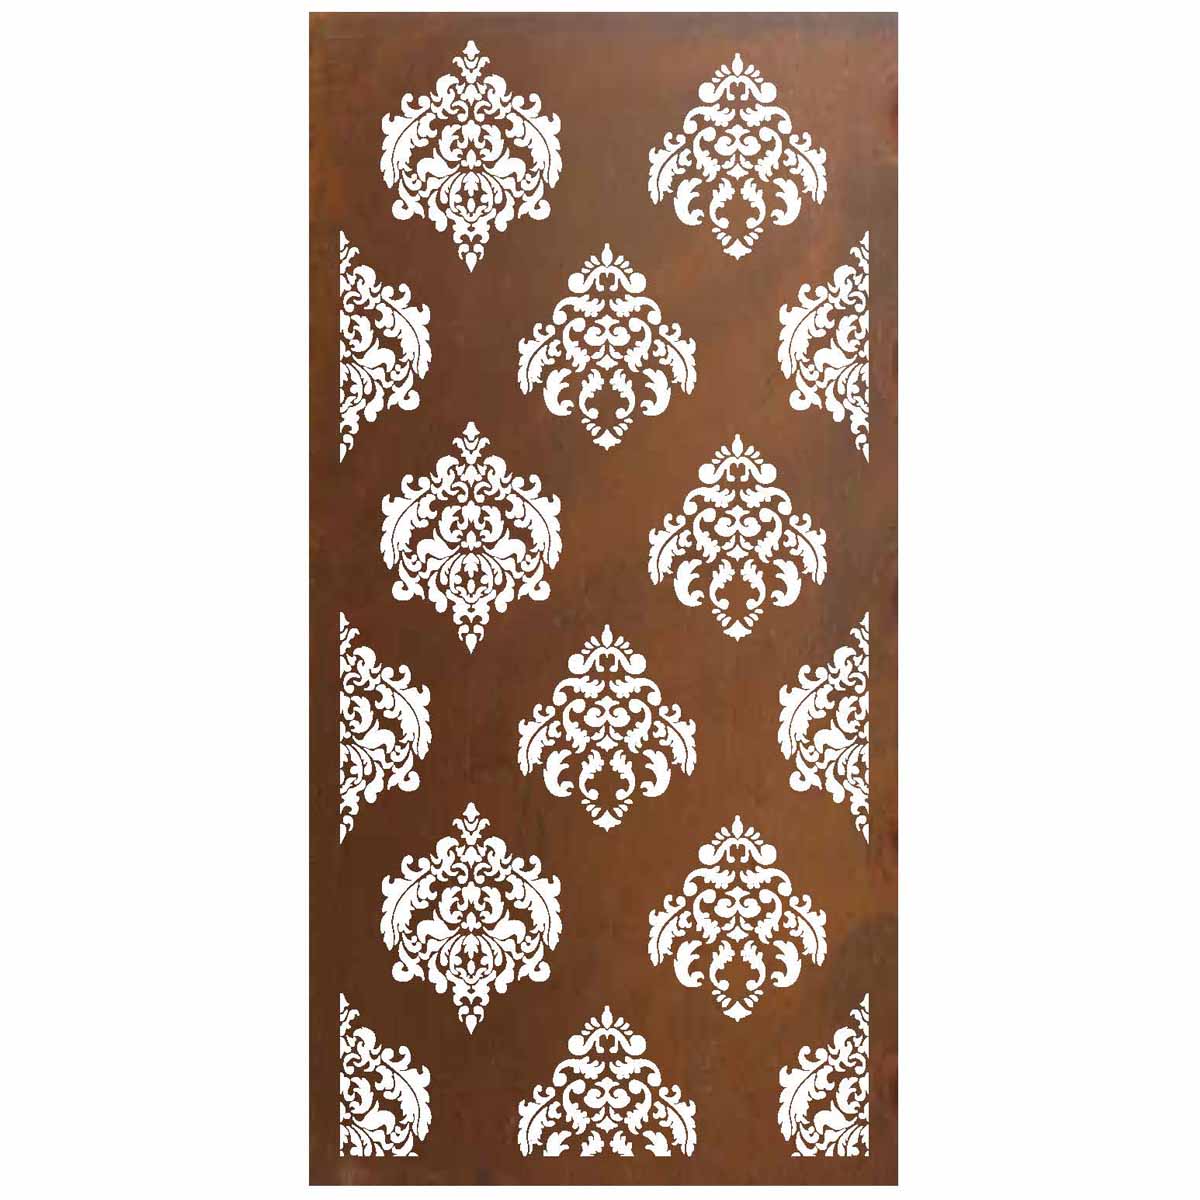 Damask- Outdoor Privacy Screen